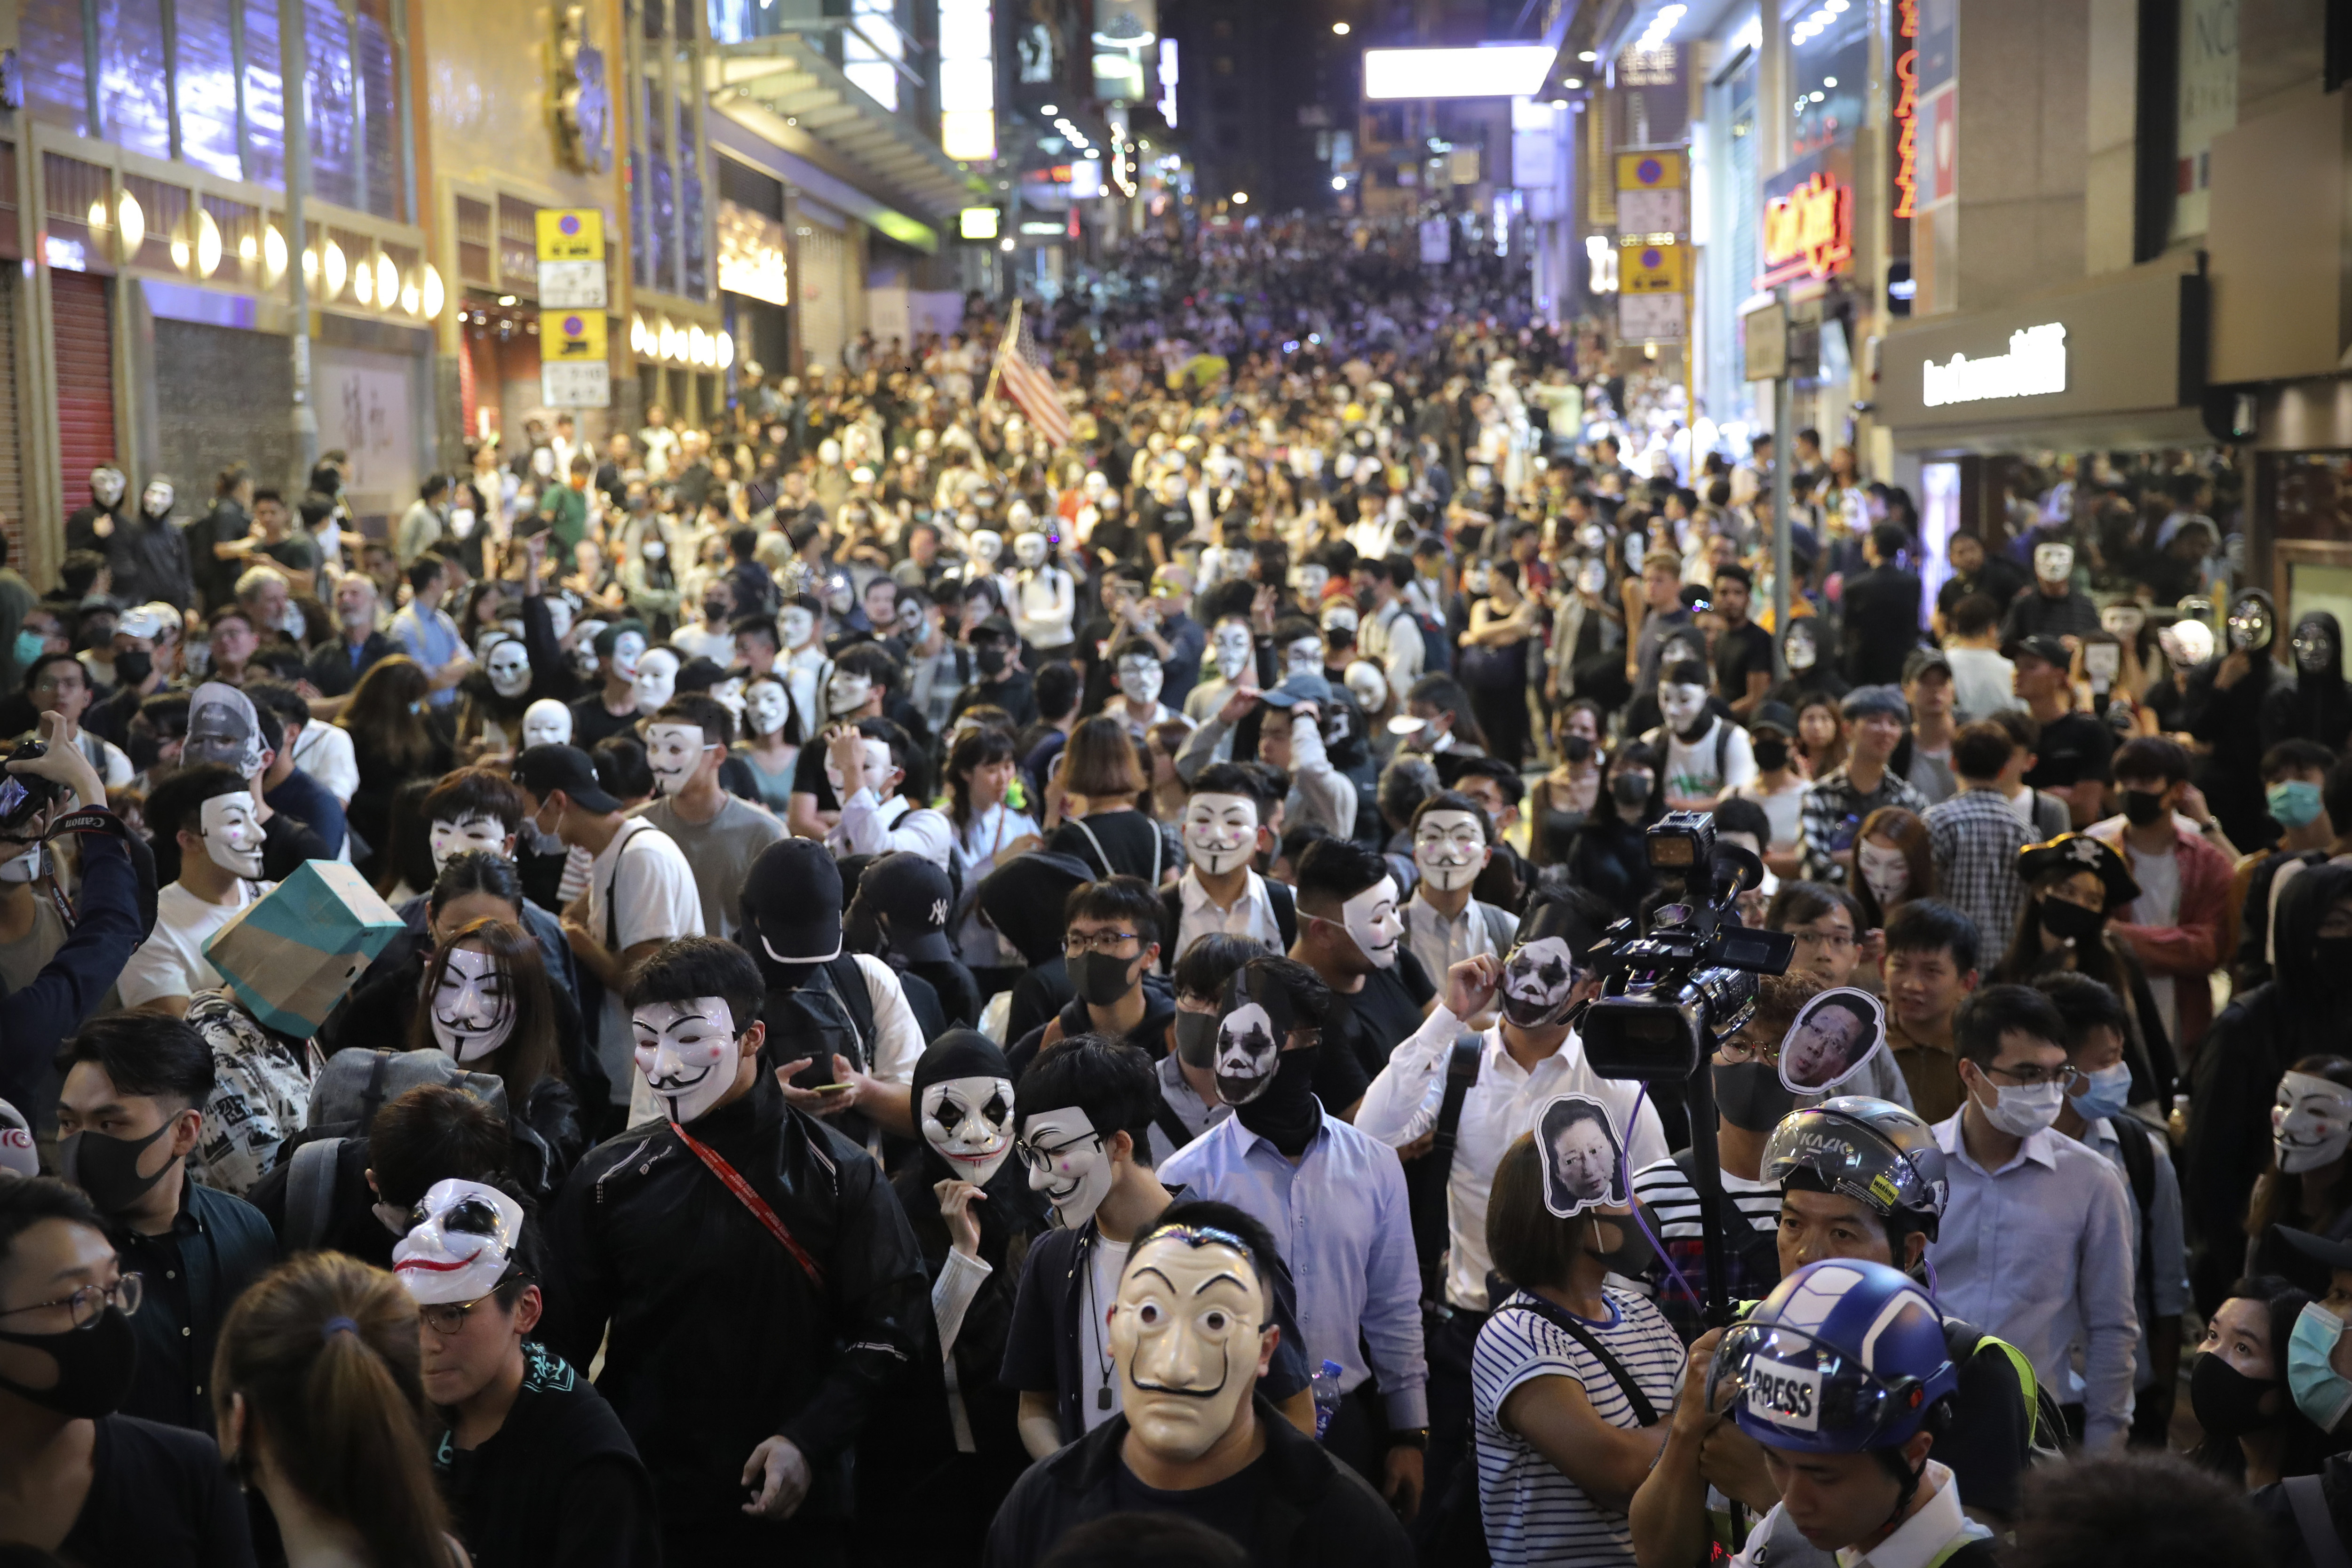 People wearing masks gather on a street in Hong Kong, Thursday, Oct. 31, 2019. Hong Kong authorities are bracing as pro-democracy protesters urged people on Thursday to celebrate Halloween by wearing masks on a march in defiance of a government ban on face coverings. (AP Photo/Kin Cheung)